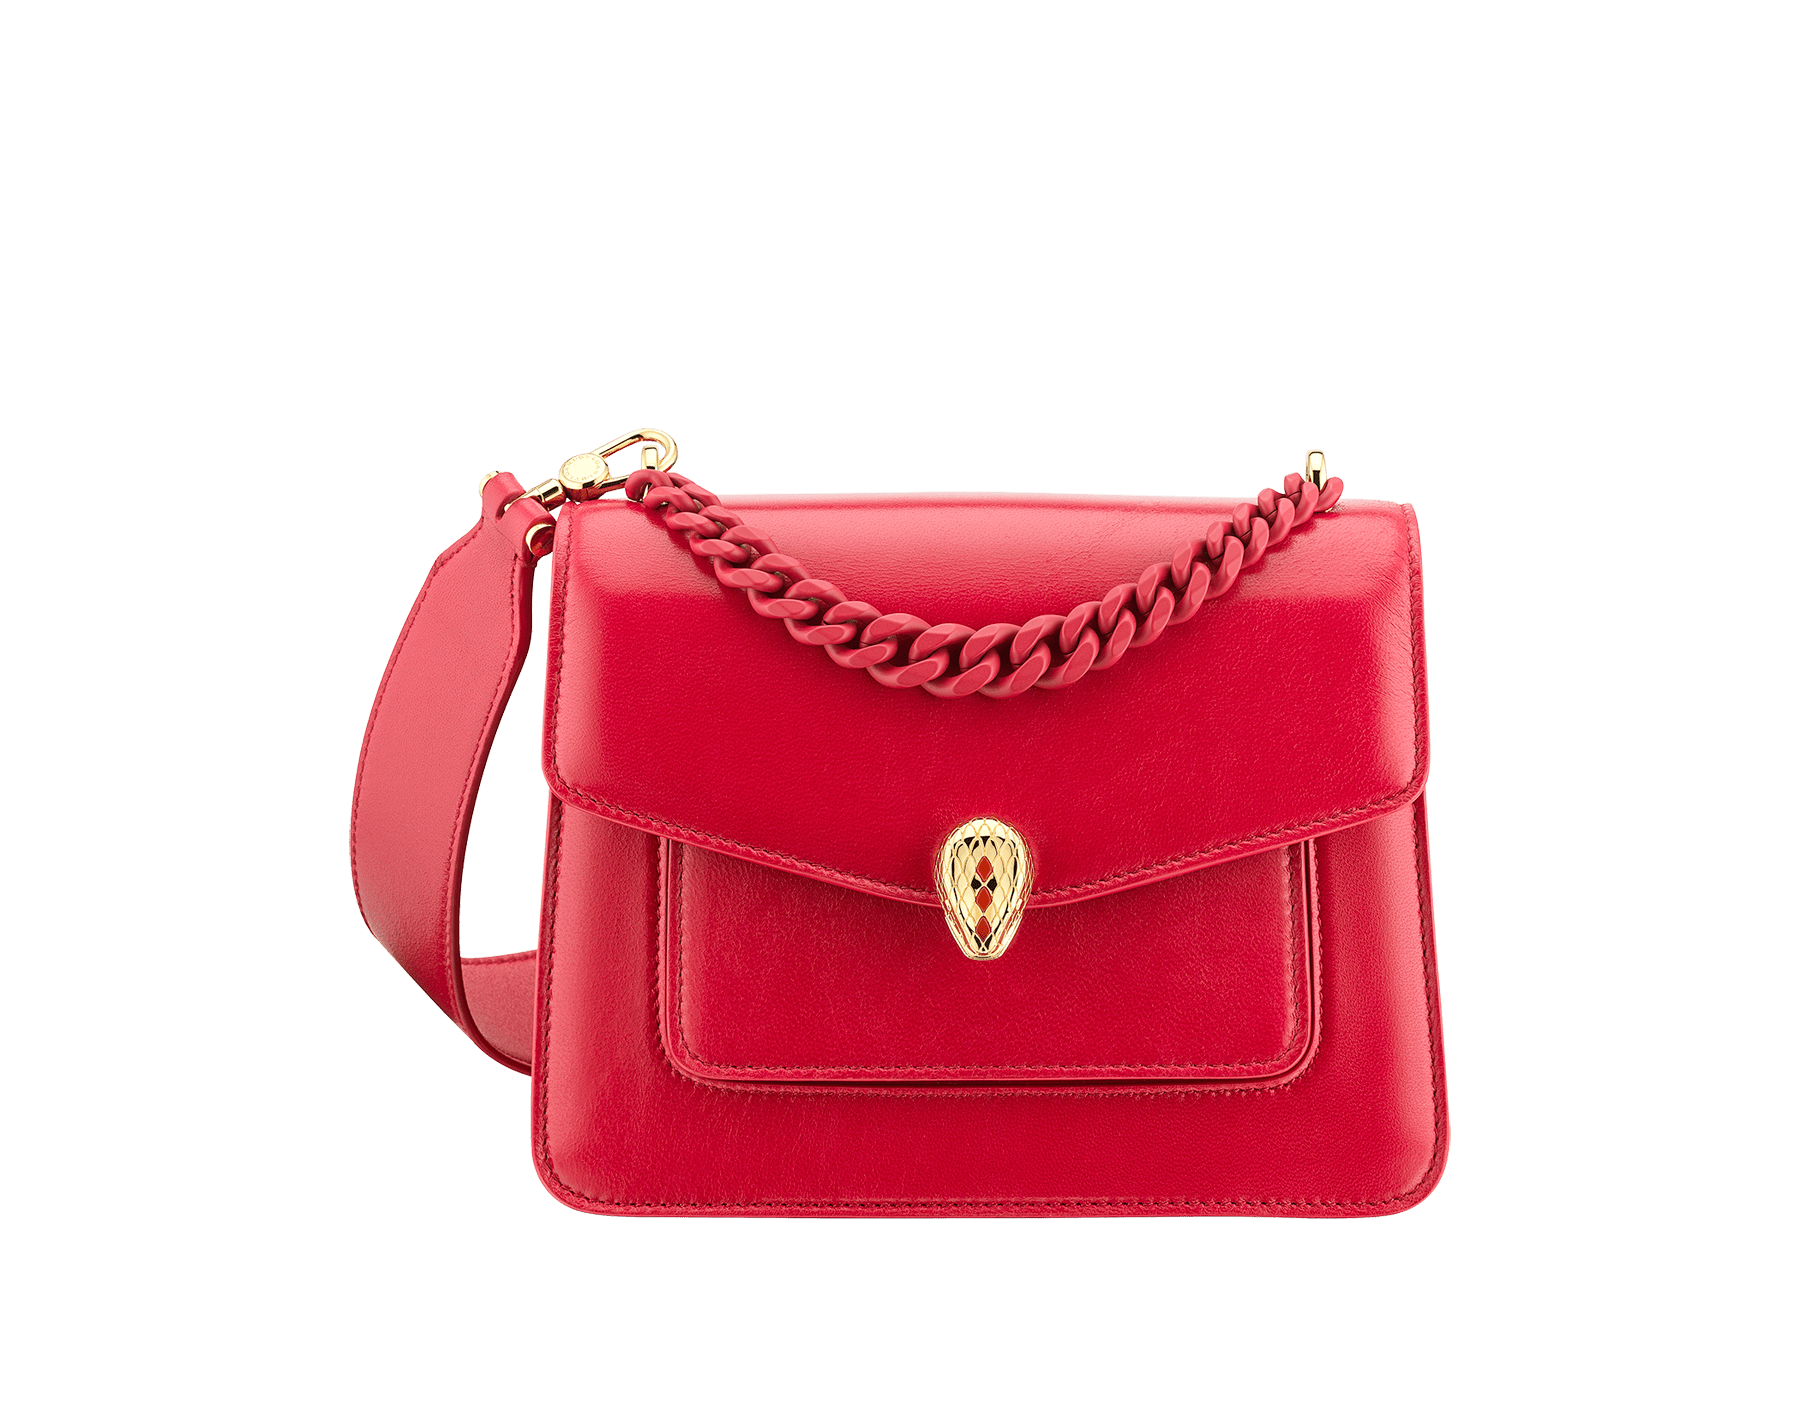 "Serpenti Forever" small maxi chain crossbody bag in Amaranth Garnet red nappa leather, with Pink Spinel fuchsia nappa leather internal lining. New Serpenti head closure in gold plated brass, finished with small red carnelian scales in the middle and red enamel eyes. 1134-MCNa image 1